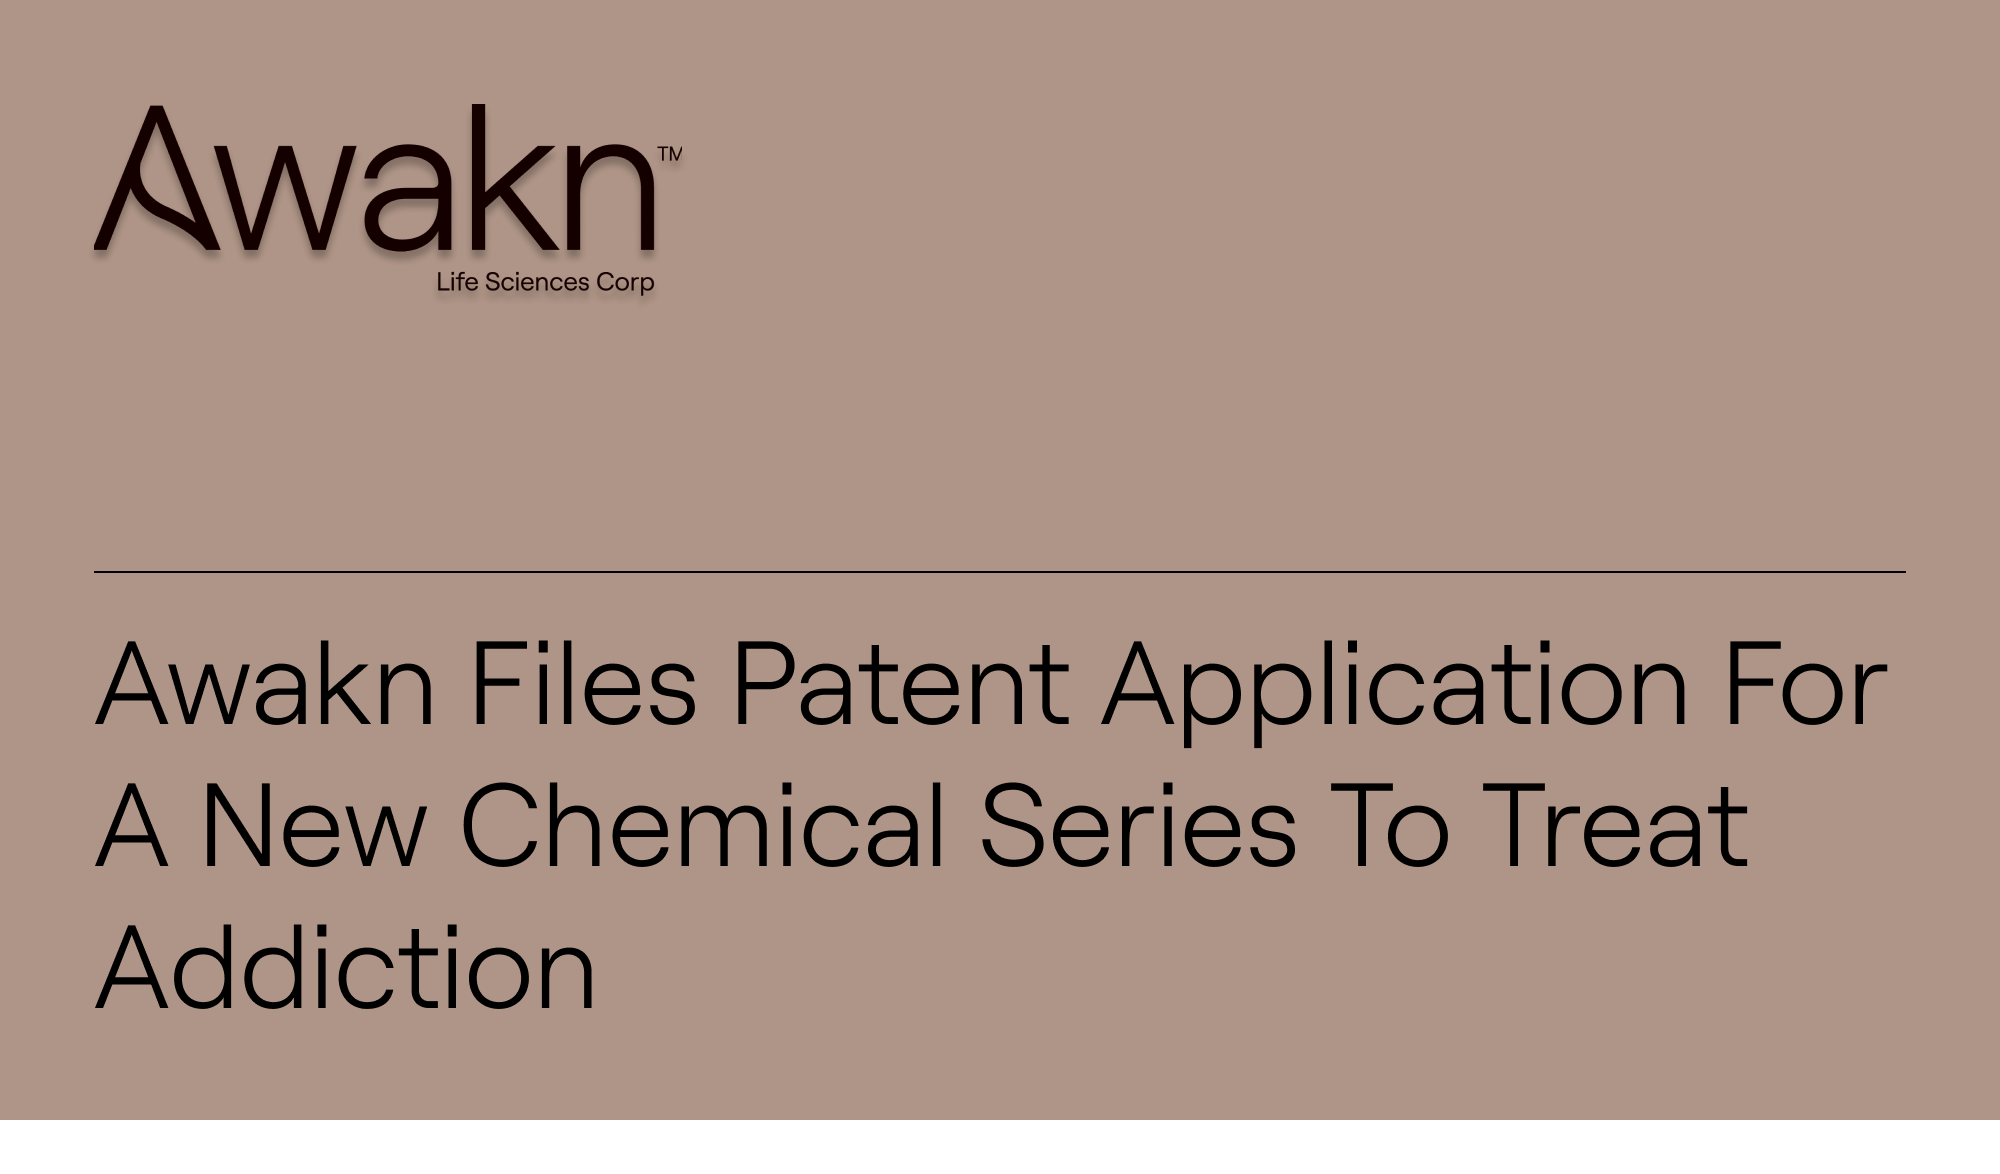 Awakn Files Patent Application For A New Chemical Series To Treat Addiction